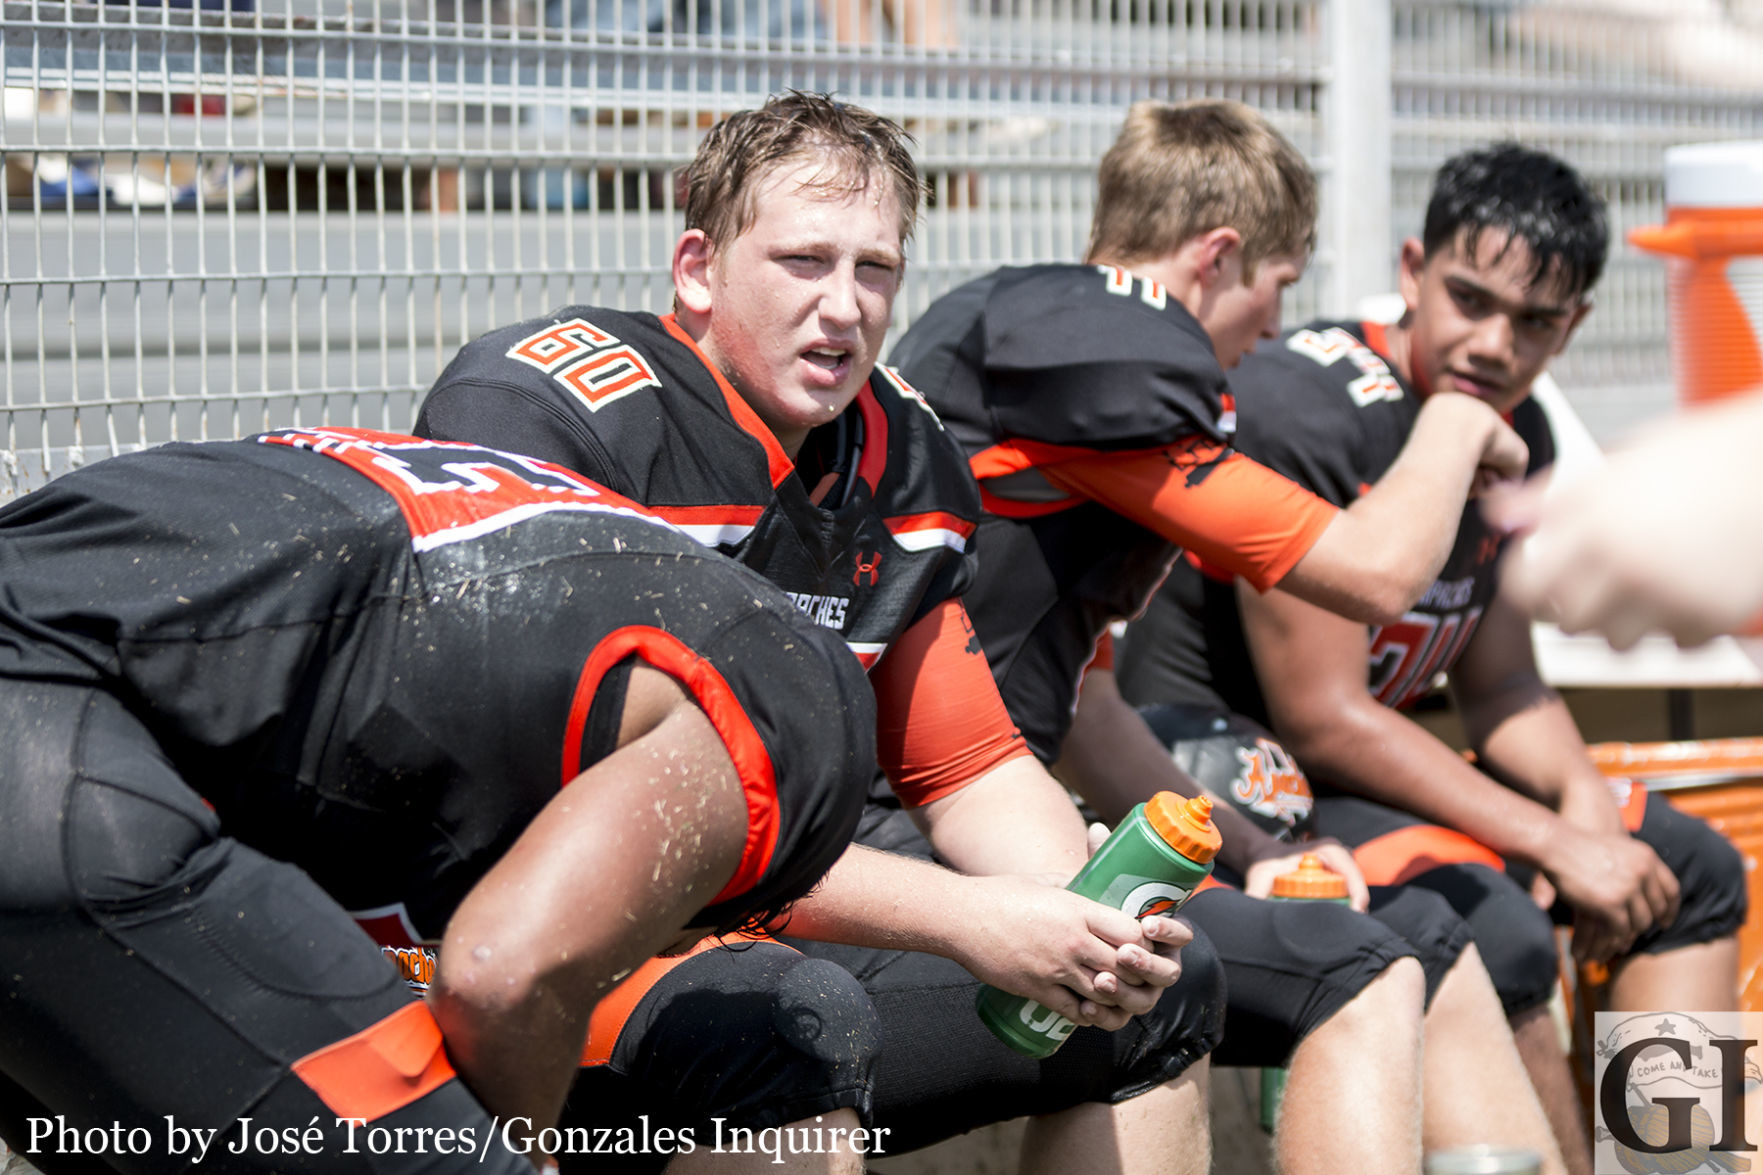 The Apaches hydrated in Saturday’s blistering heat as temperatures reached over 90 degrees in their 21-20 win.